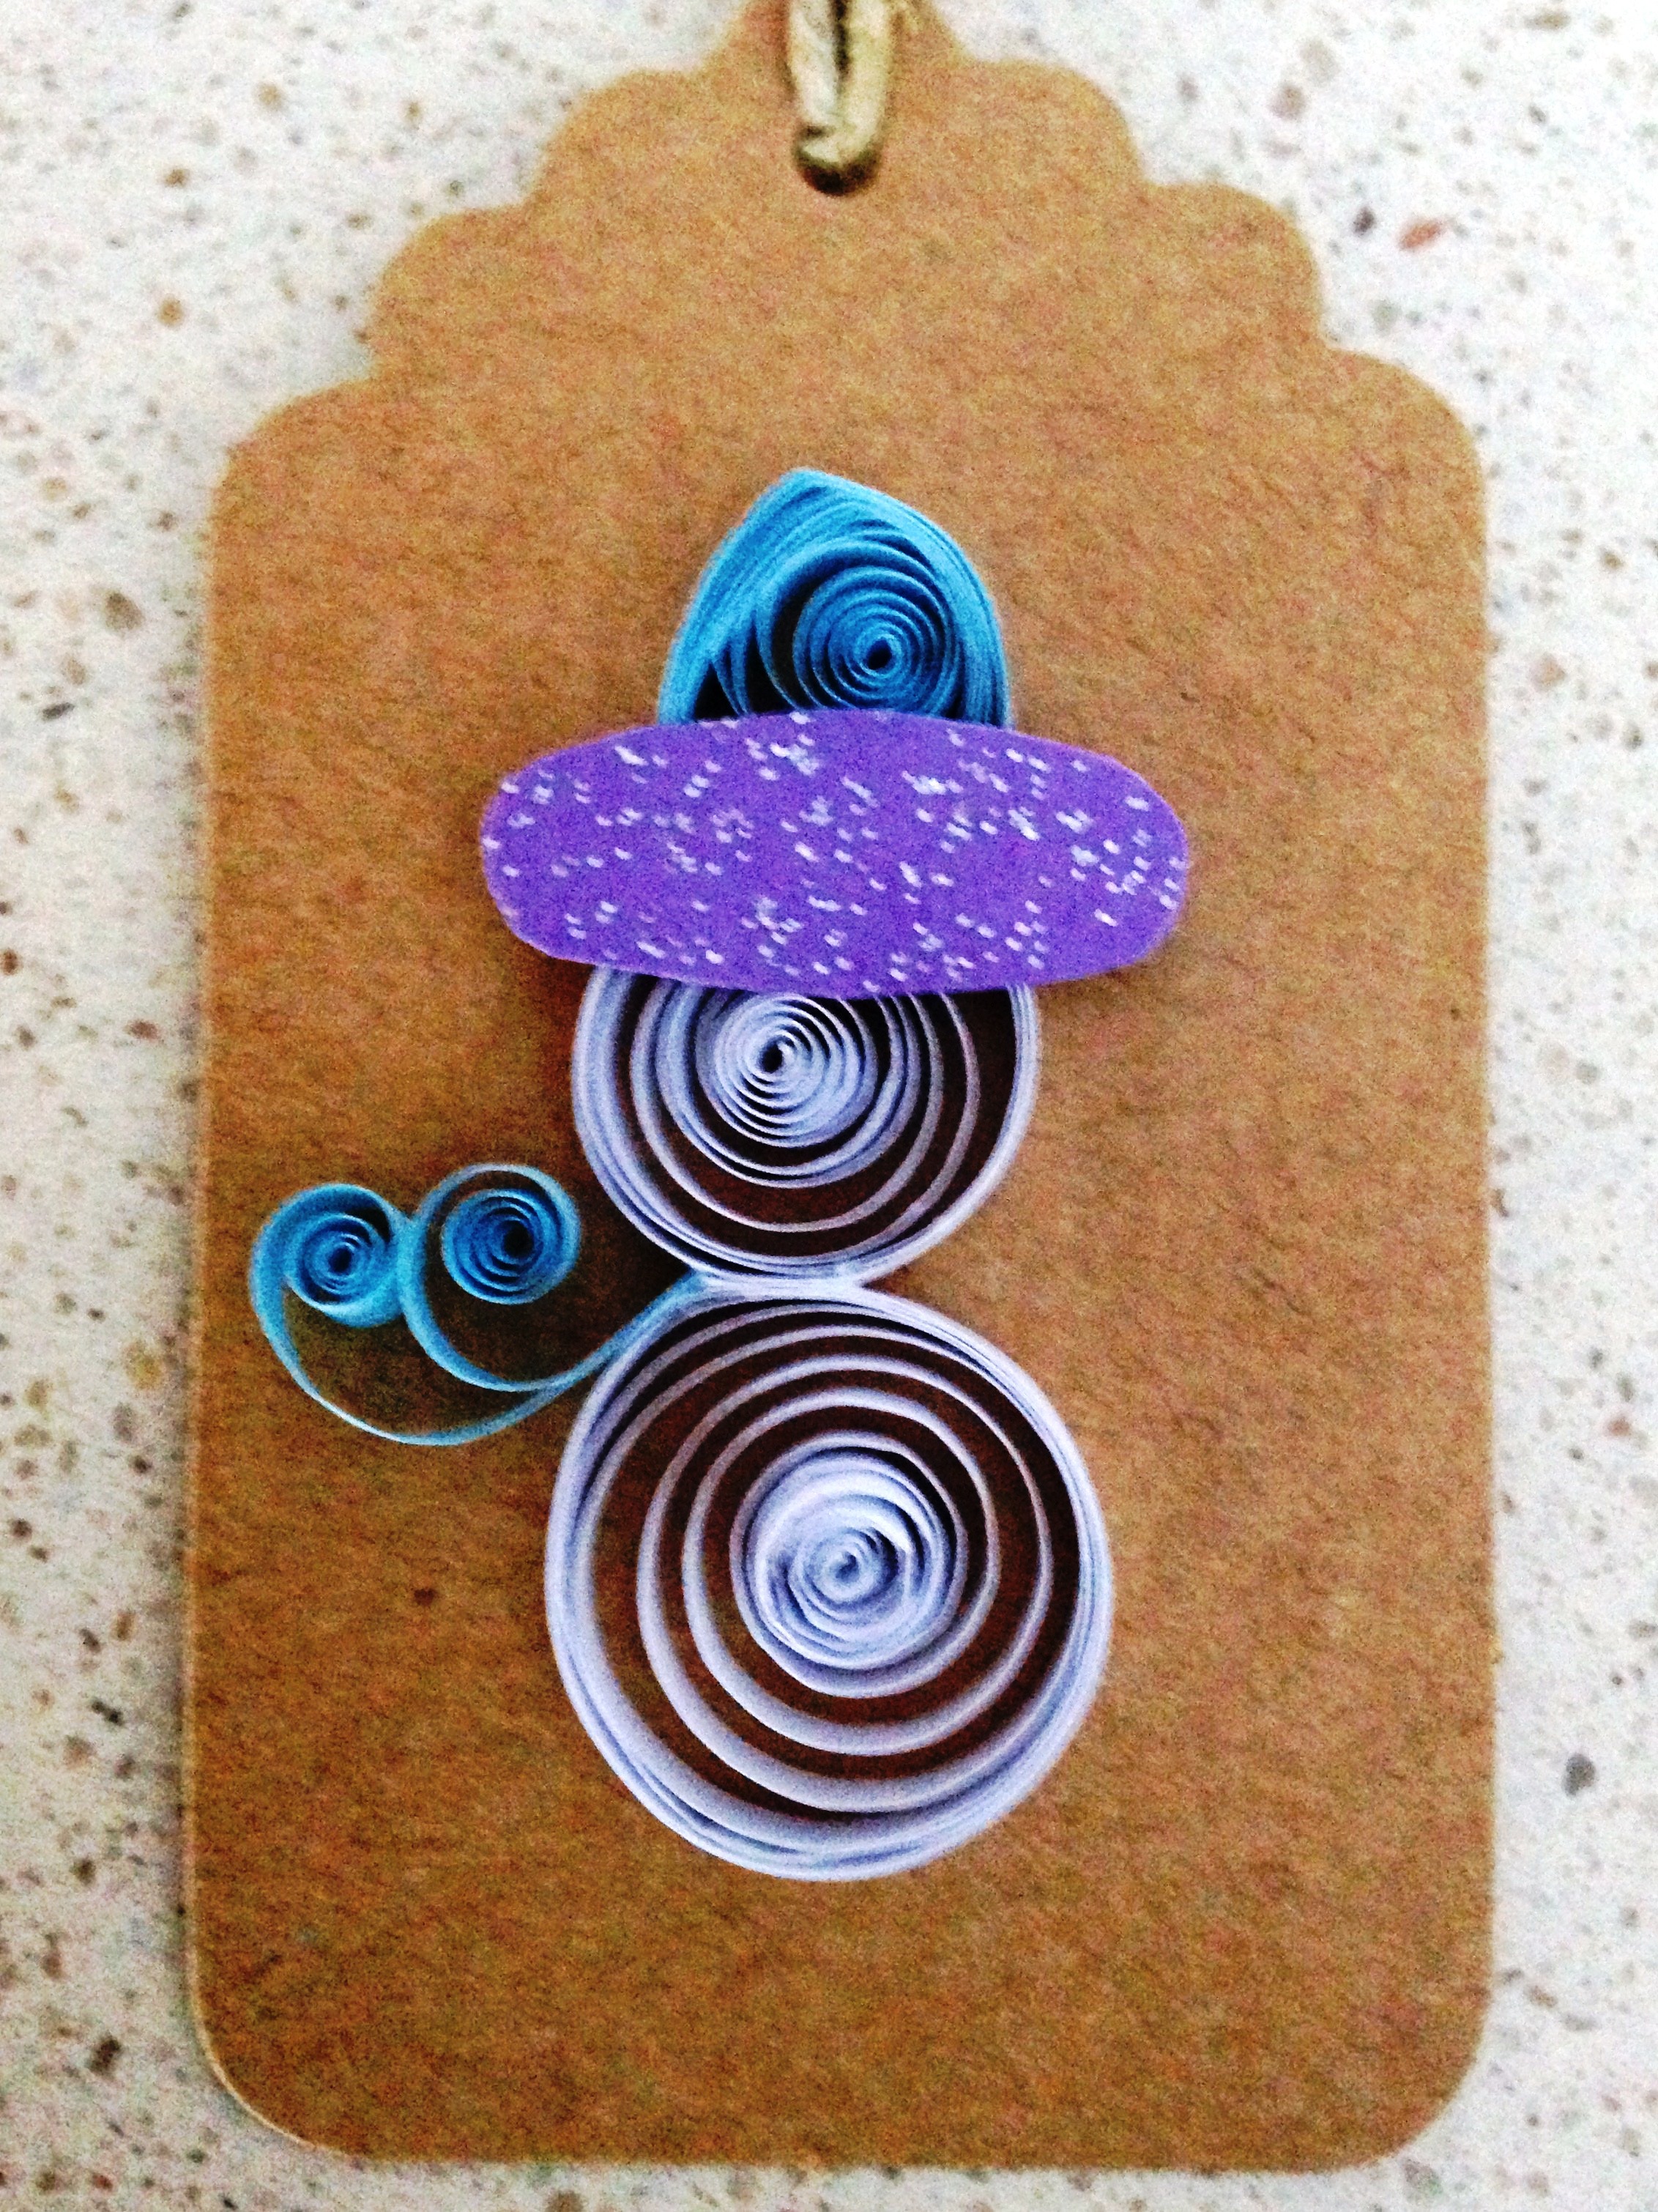 Make quilled gift tags Nov 17